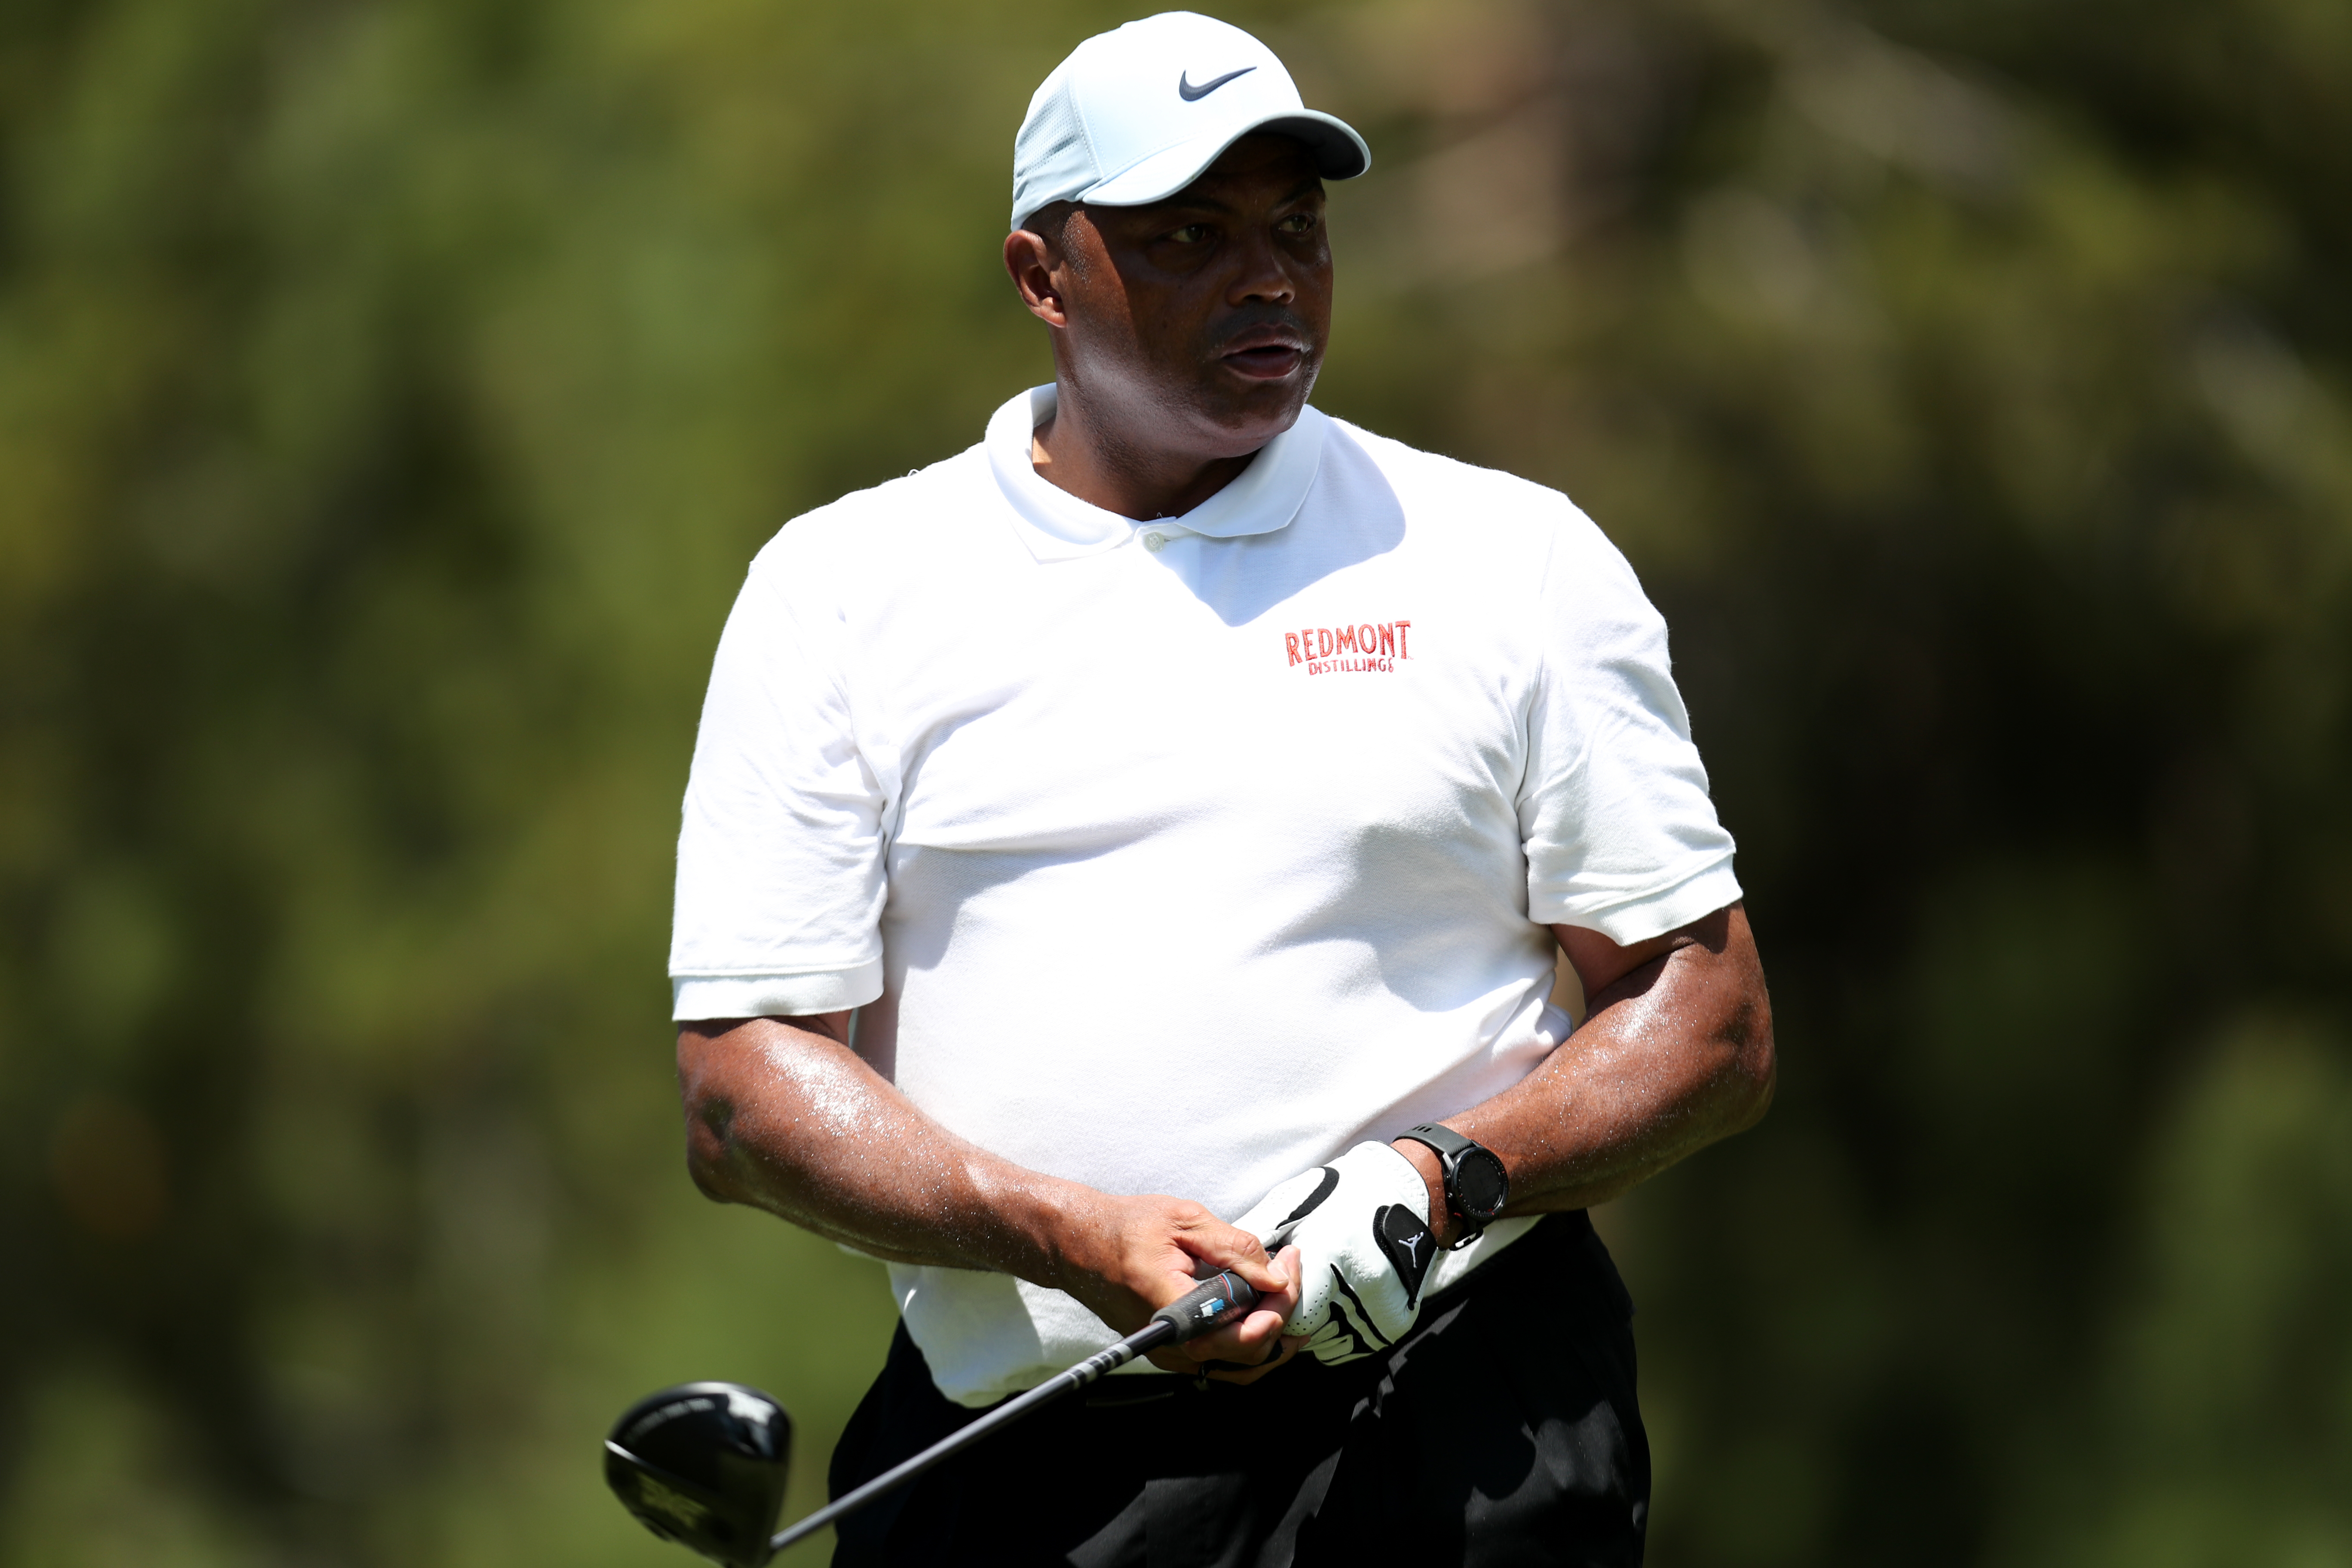 NBA great Charles Barkley tees off at the American Century Championship in July